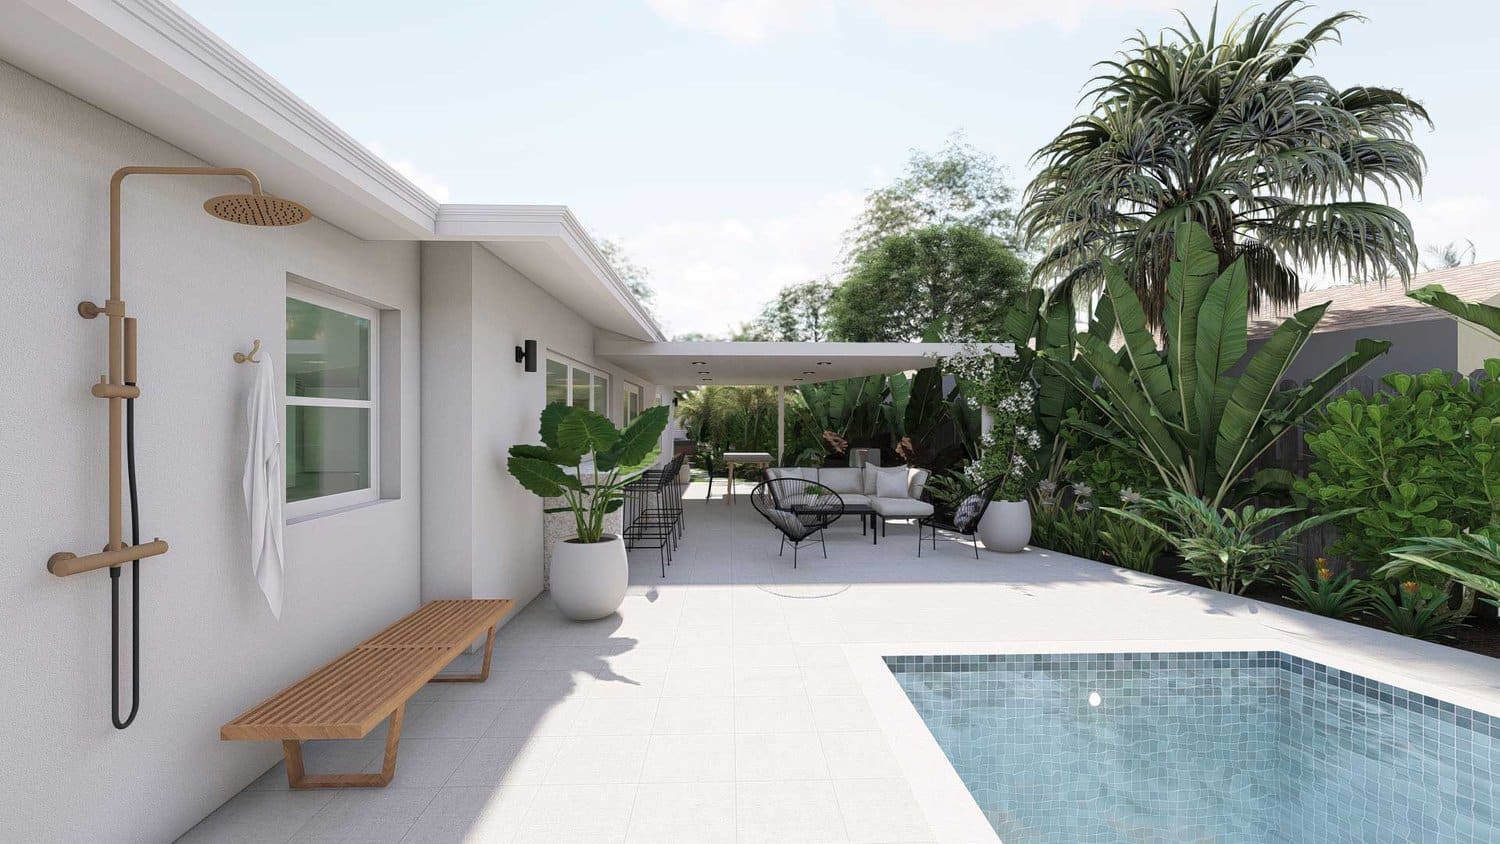 Miami yard with pool, outdoor shower and patio